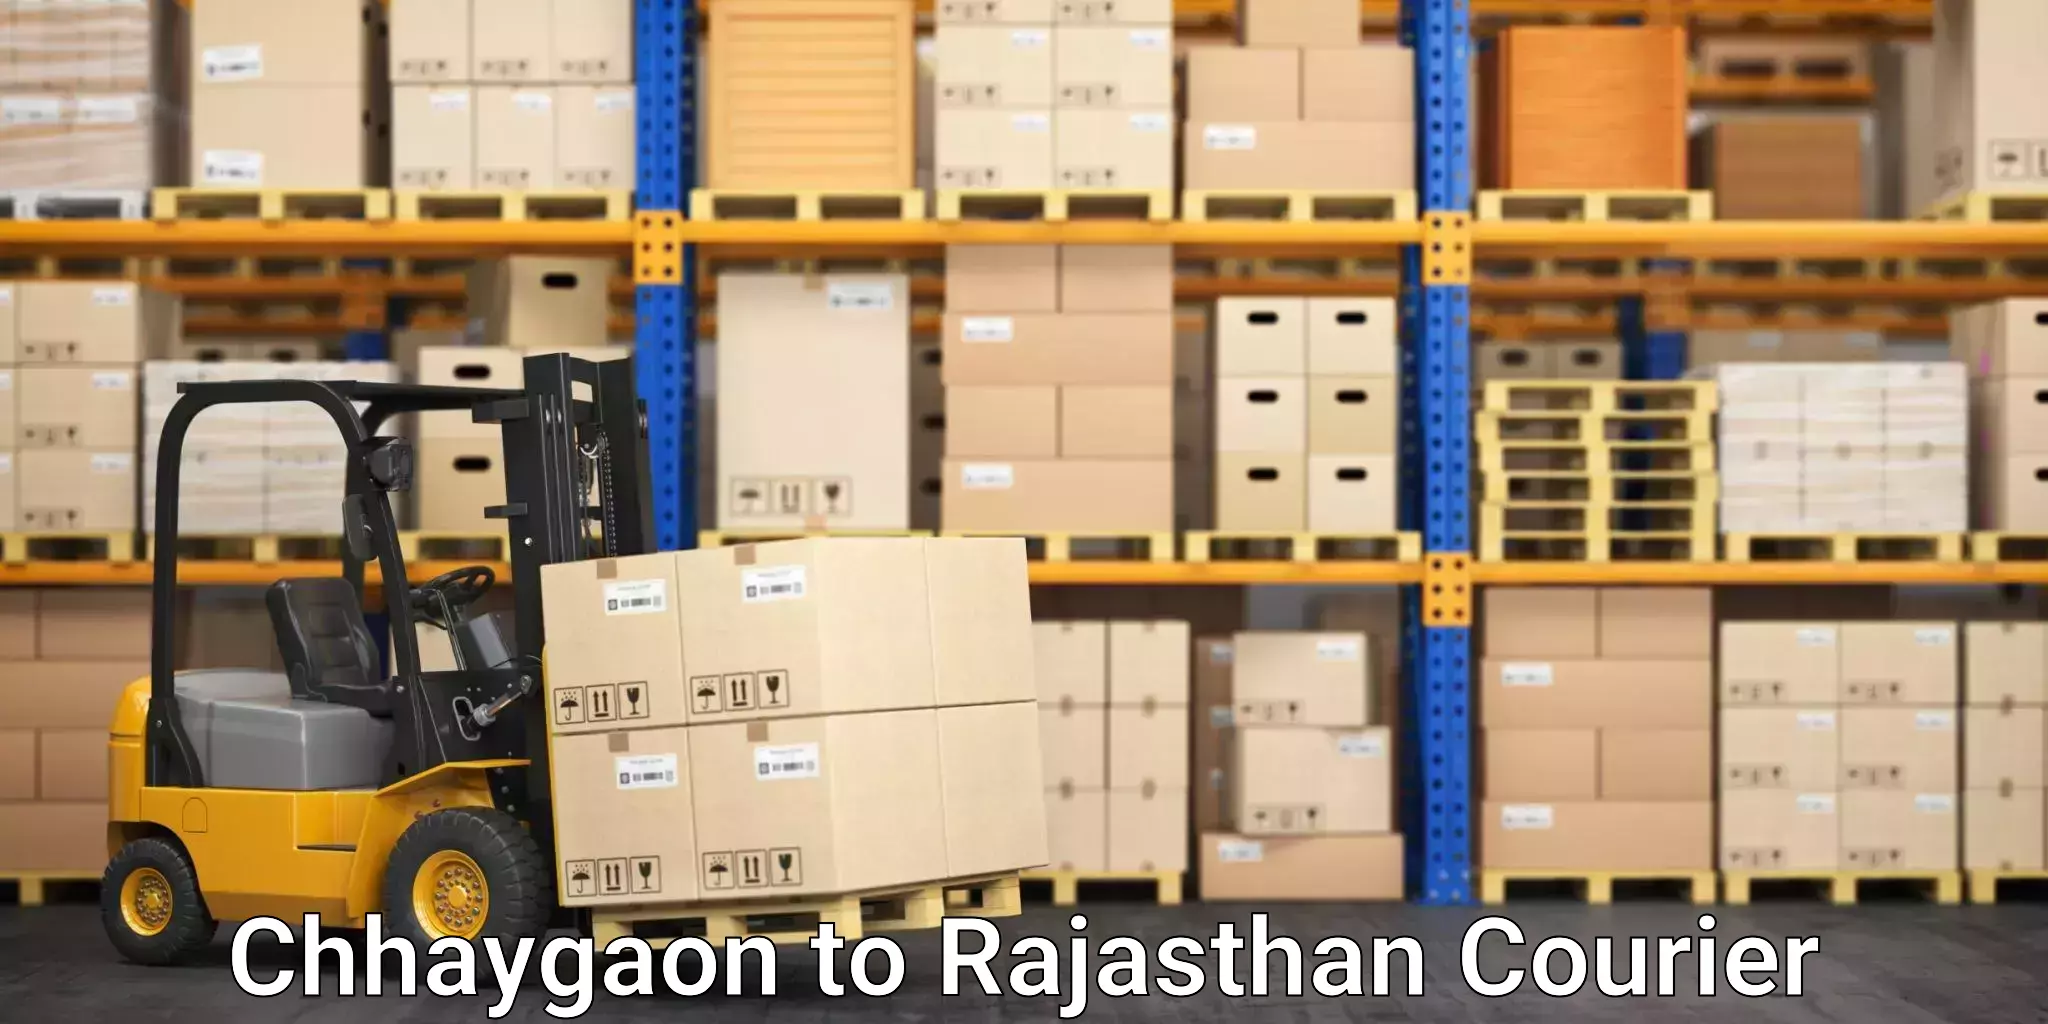 Full-service courier options Chhaygaon to Sojat